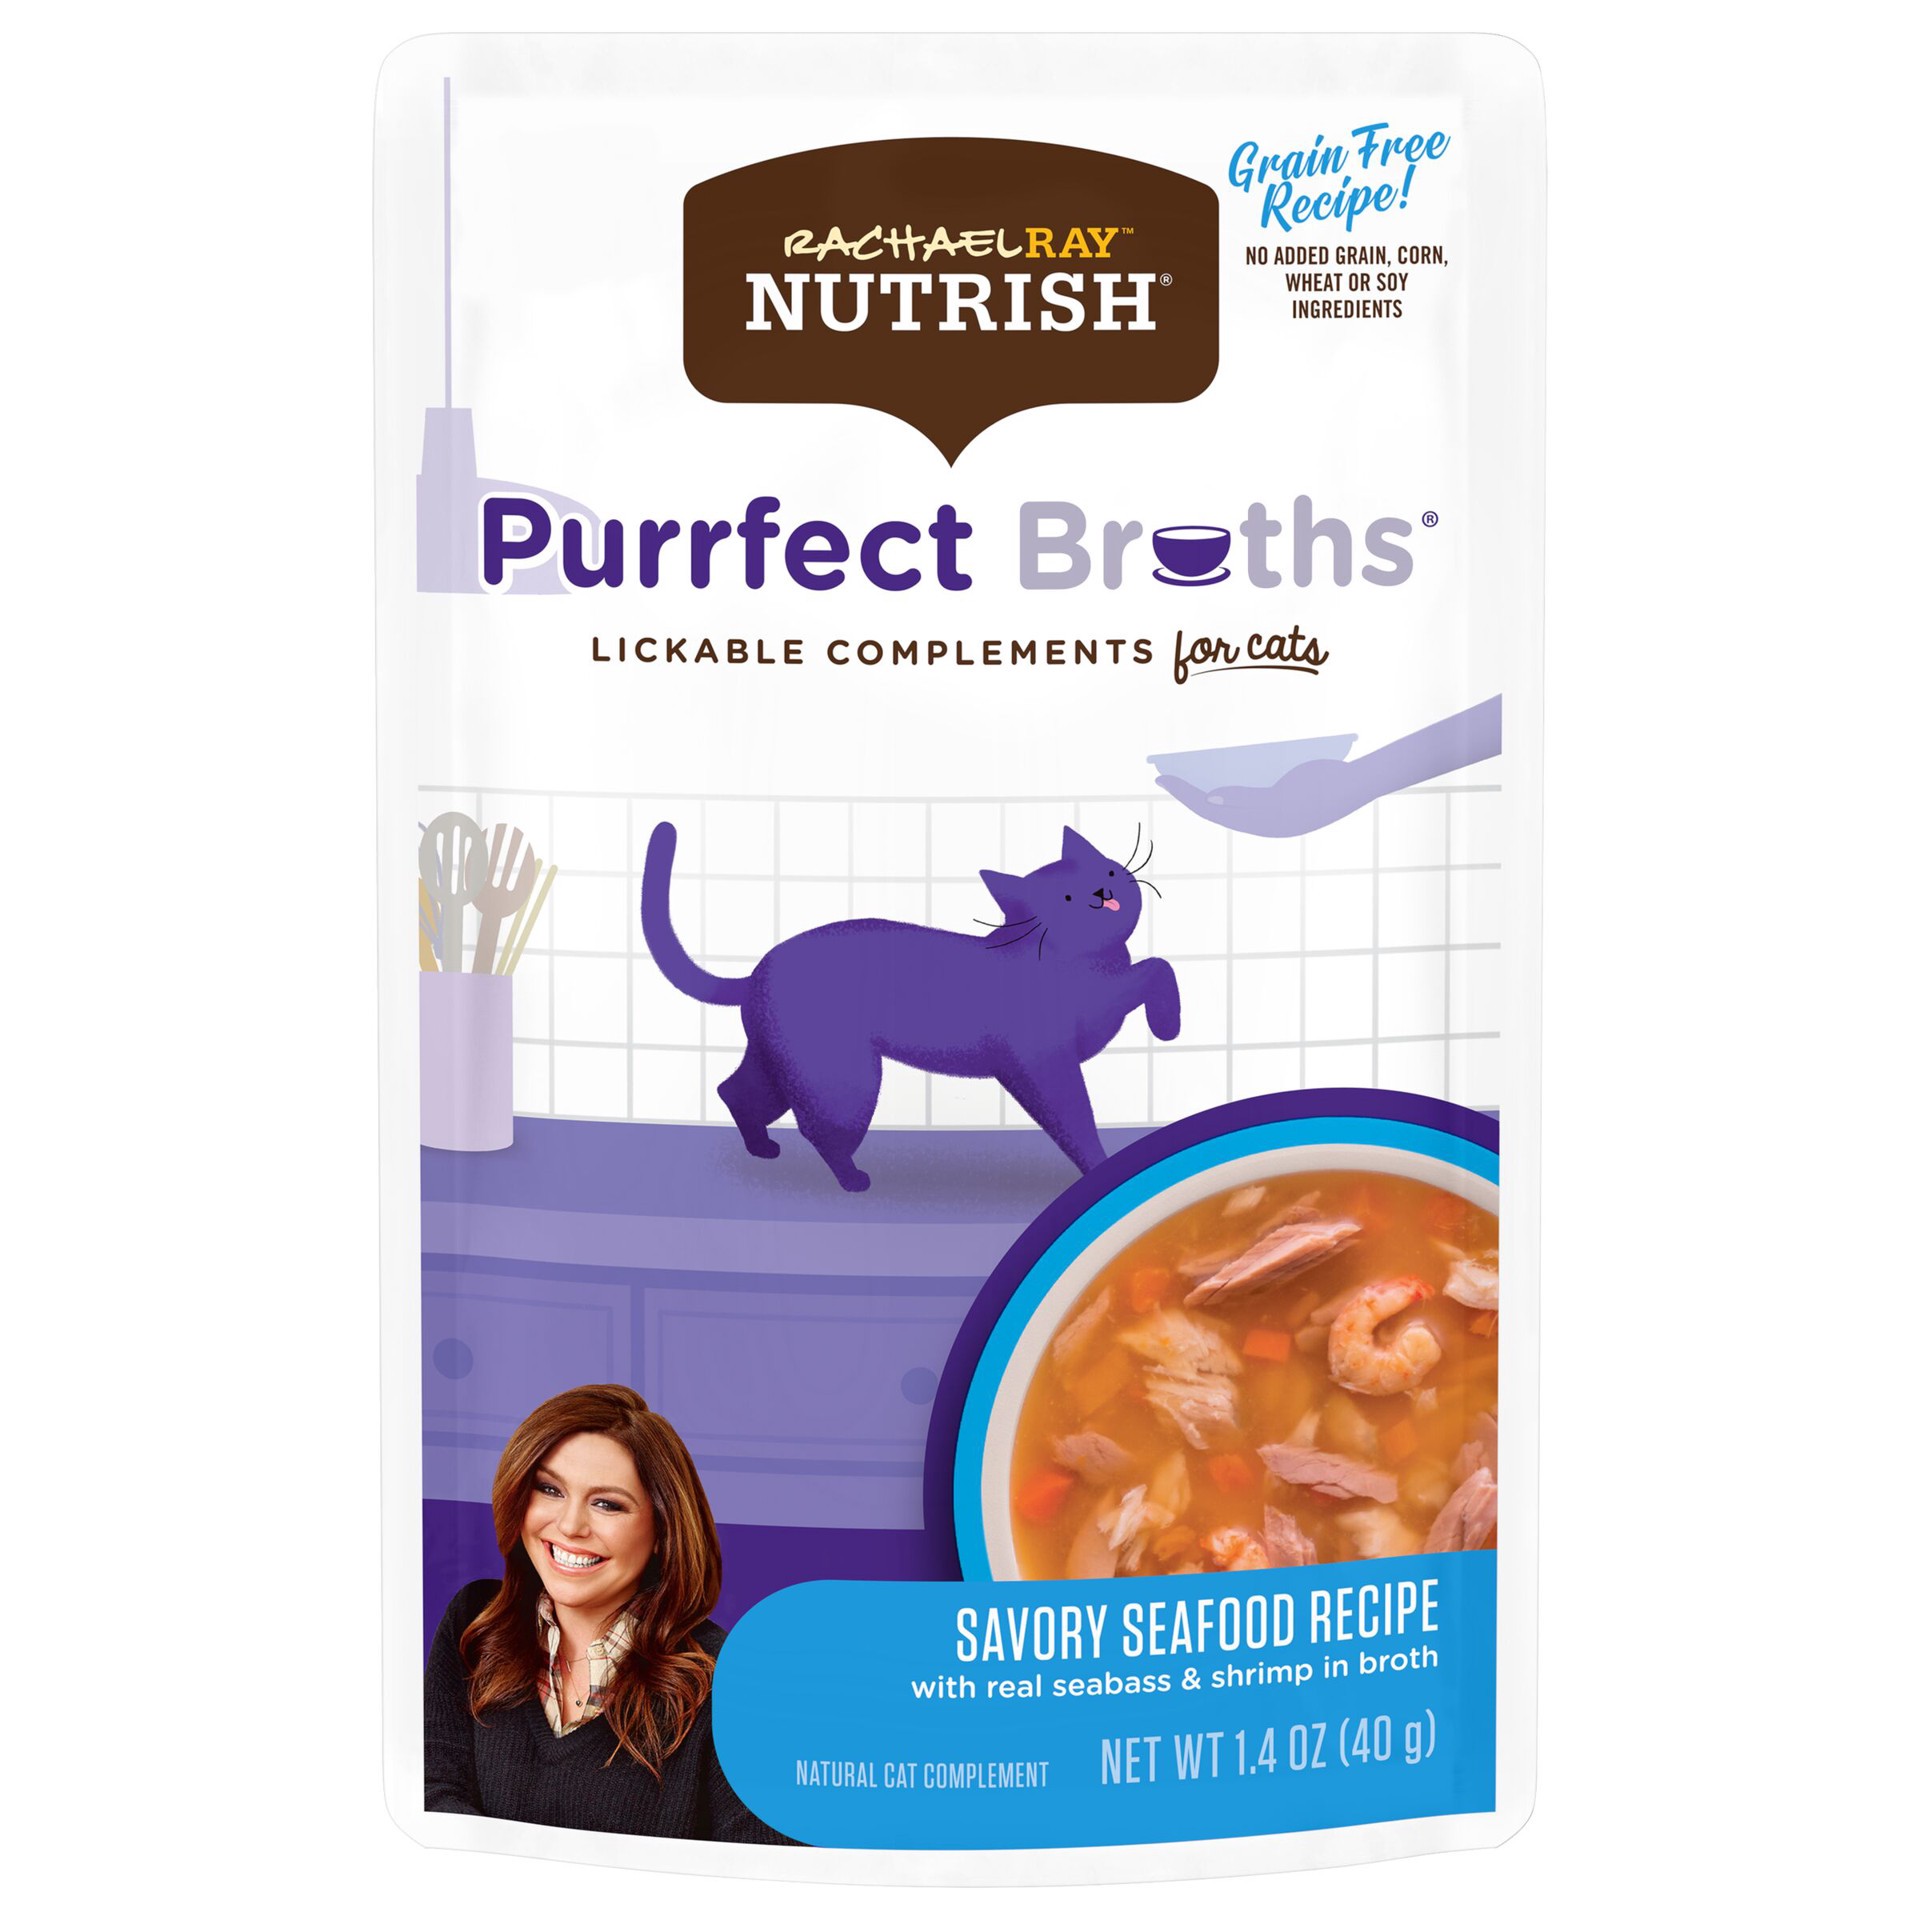 slide 1 of 6, Rachael Ray Nutrish Purrfect Broths Lickable Cat Treats and Meal Complements, Savory Seafood Recipe, 1.4 Ounce Pouch, 1.4 oz